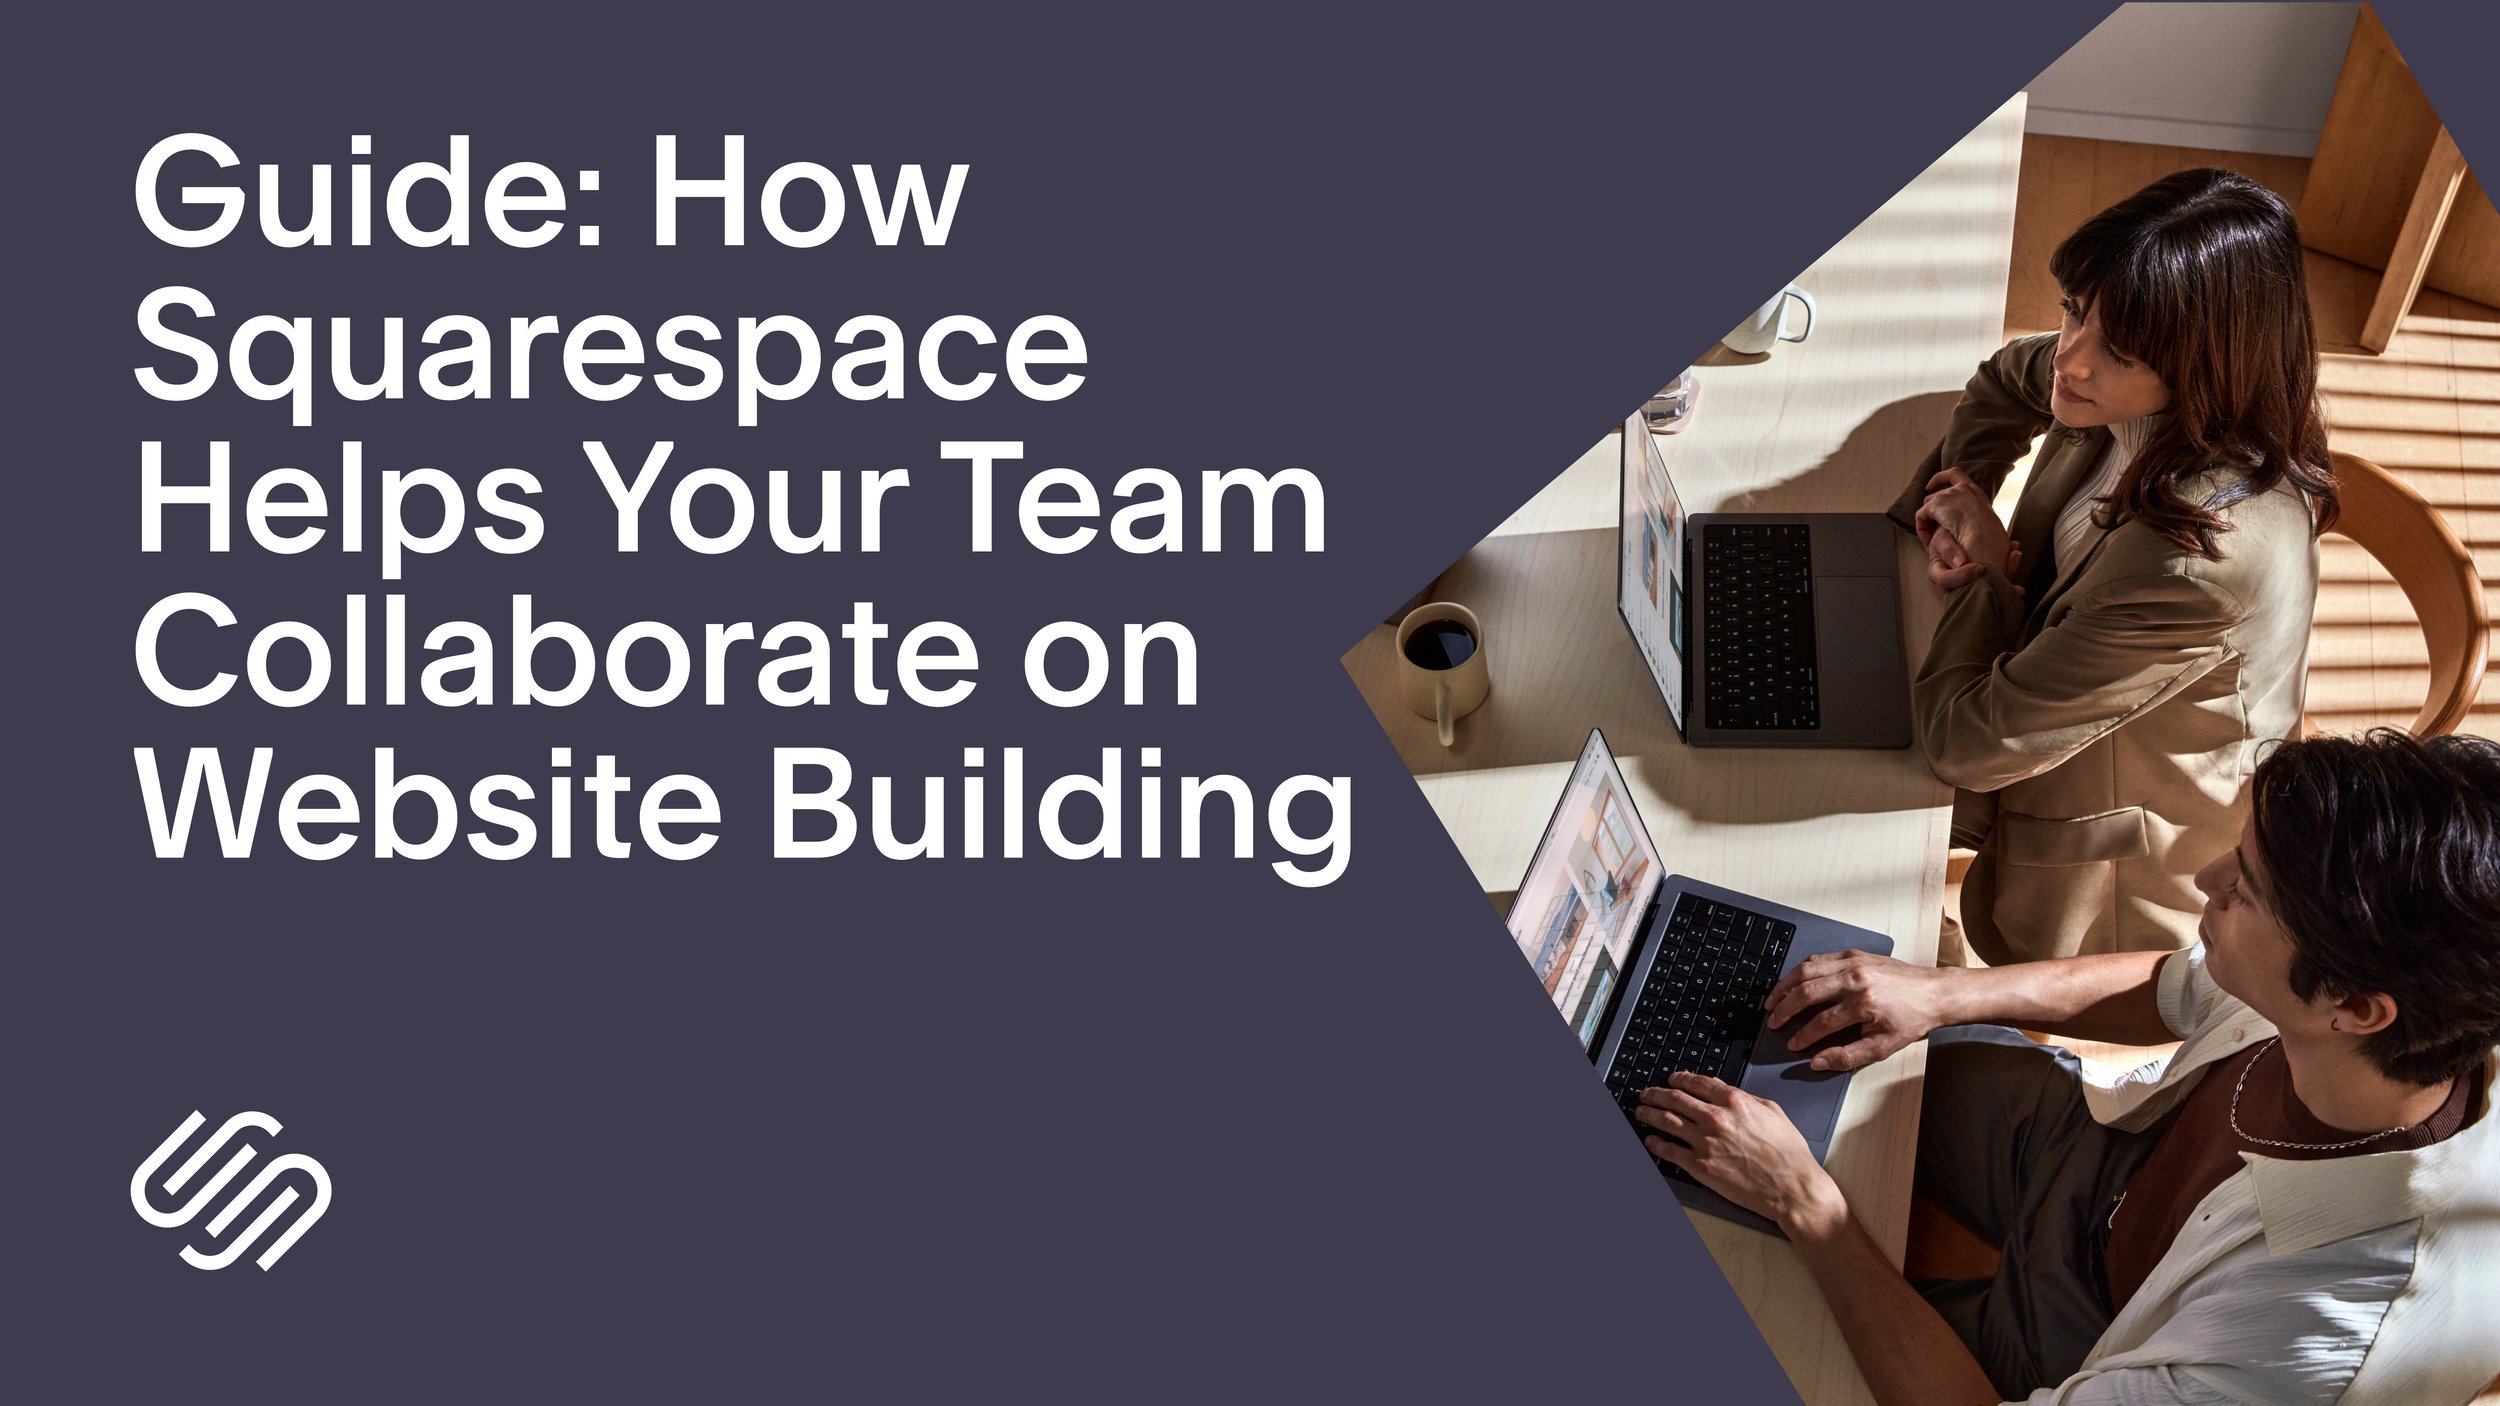 Guide: How Squarespace Helps Your Team Collaborate on Website Building